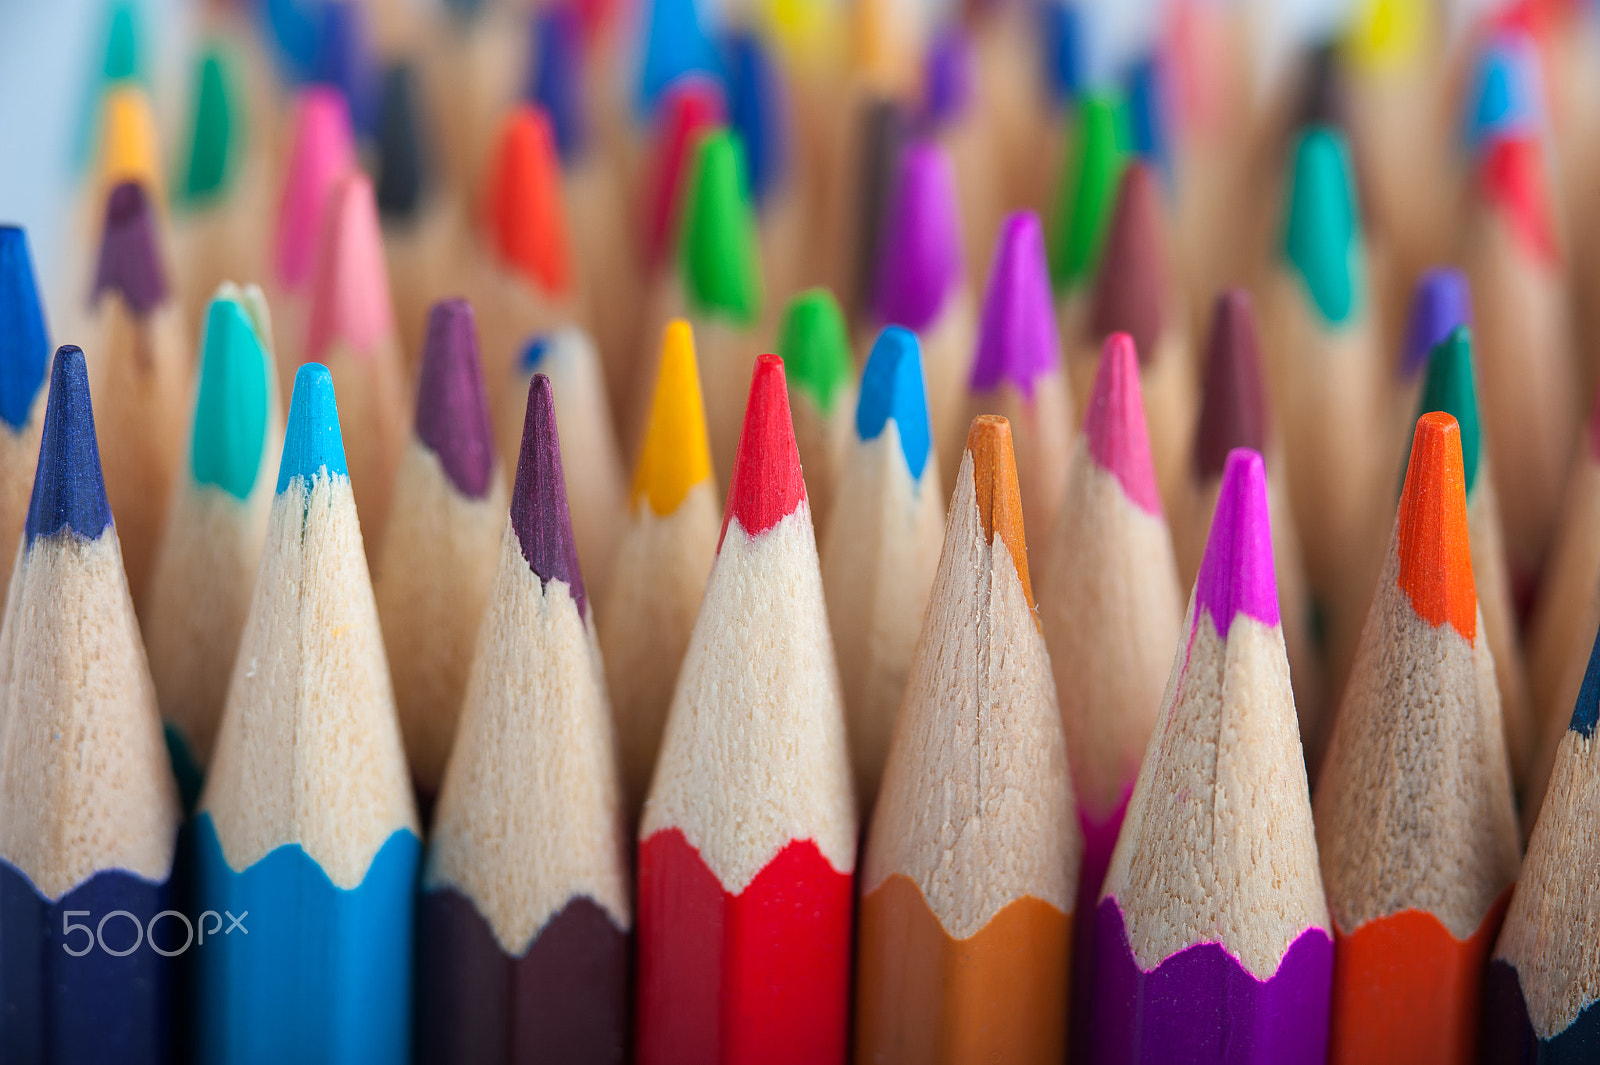 Nikon D700 + AF Micro-Nikkor 105mm f/2.8 sample photo. Assortment of multicolored wooden pencils photography